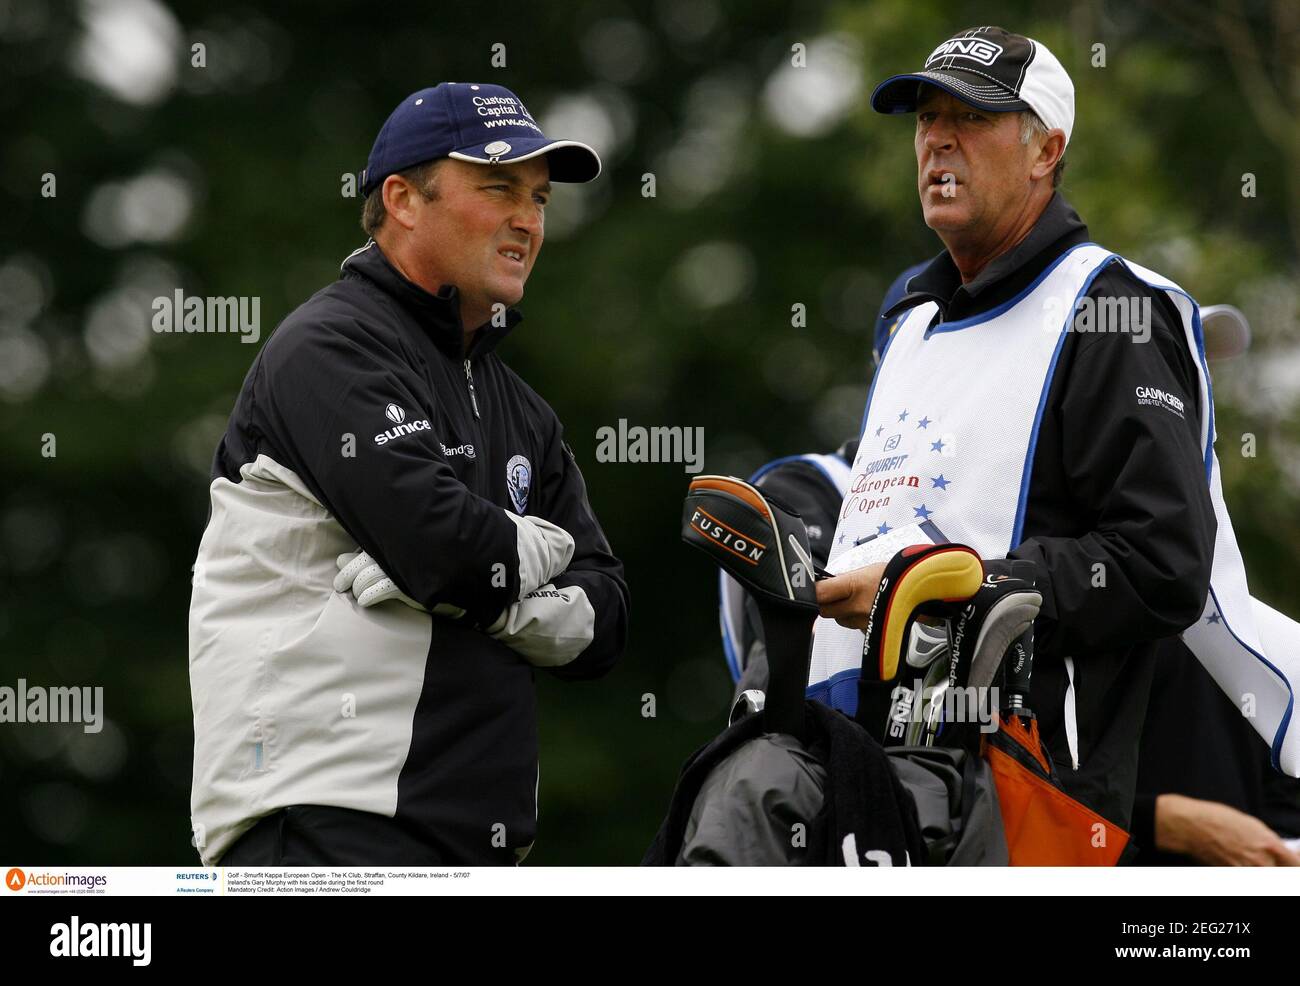 Golf - Smurfit Kappa European Open - The K Club, Straffan, County Kildare,  Ireland - 5/7/07 Ireland's Gary Murphy with his caddie during the first  round Mandatory Credit: Action Images / Andrew Couldridge Stock Photo -  Alamy